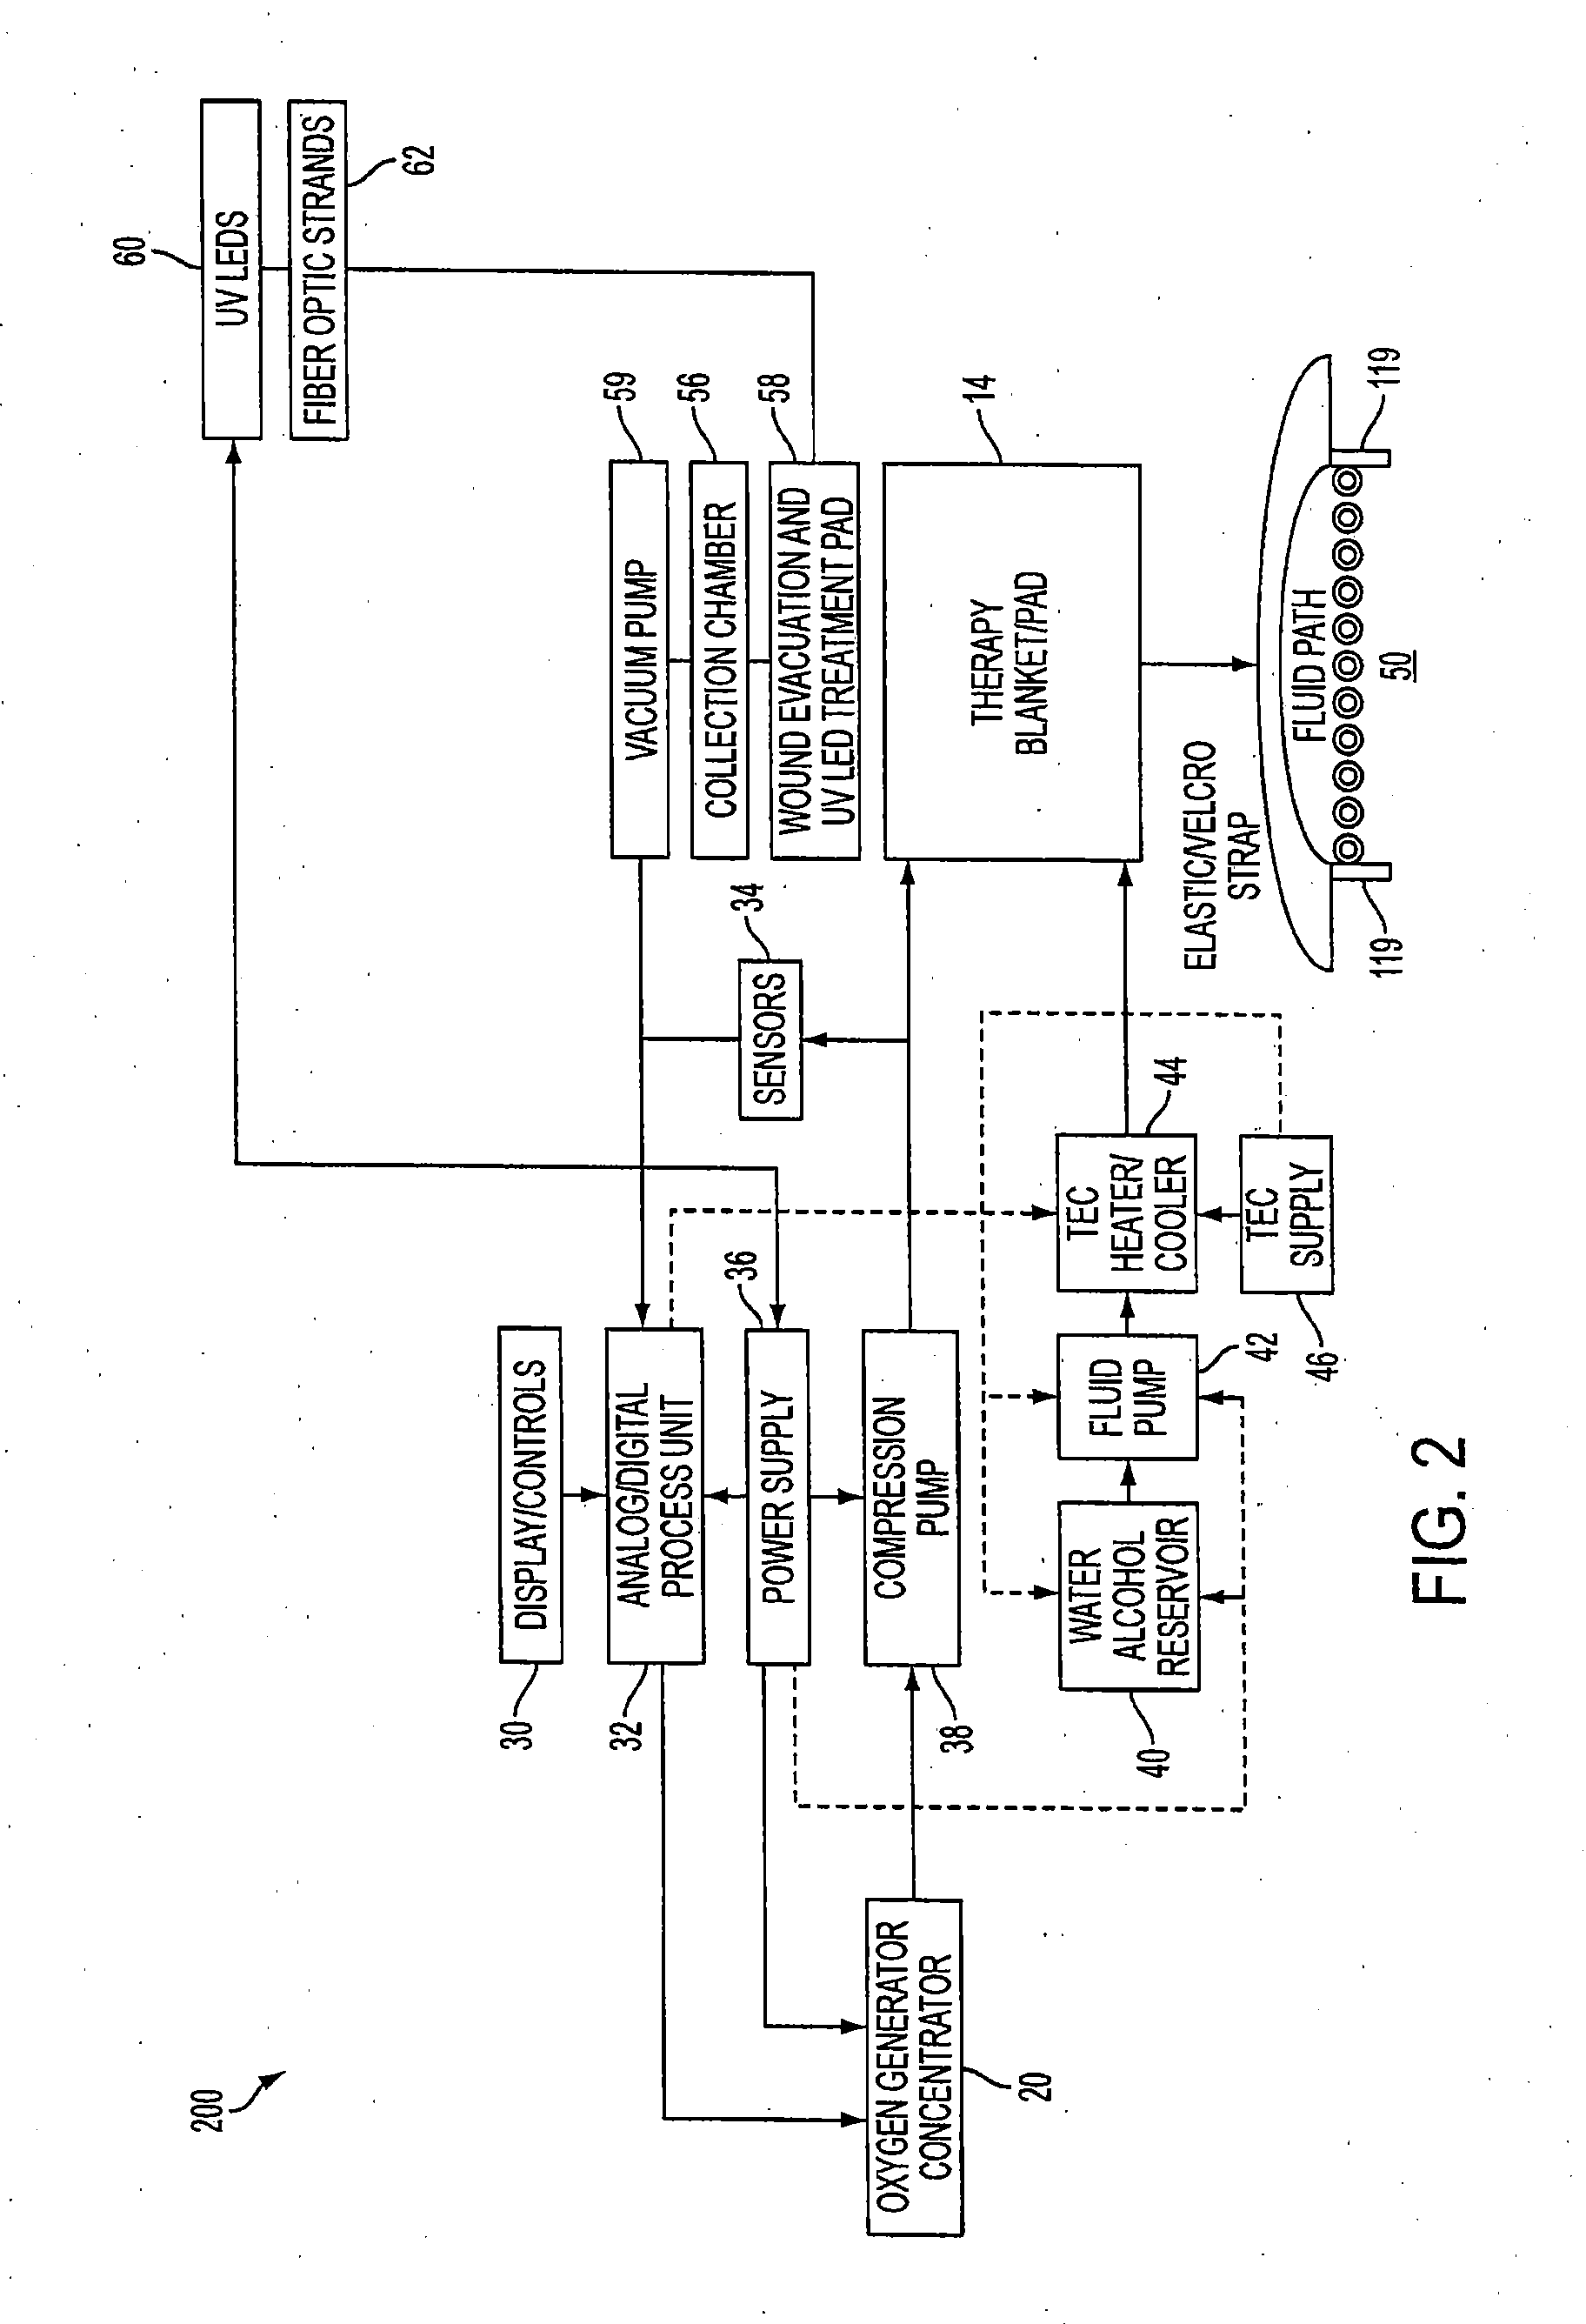 Wound care and infusion method and system utilizing a thermally-treated therapeutic agent